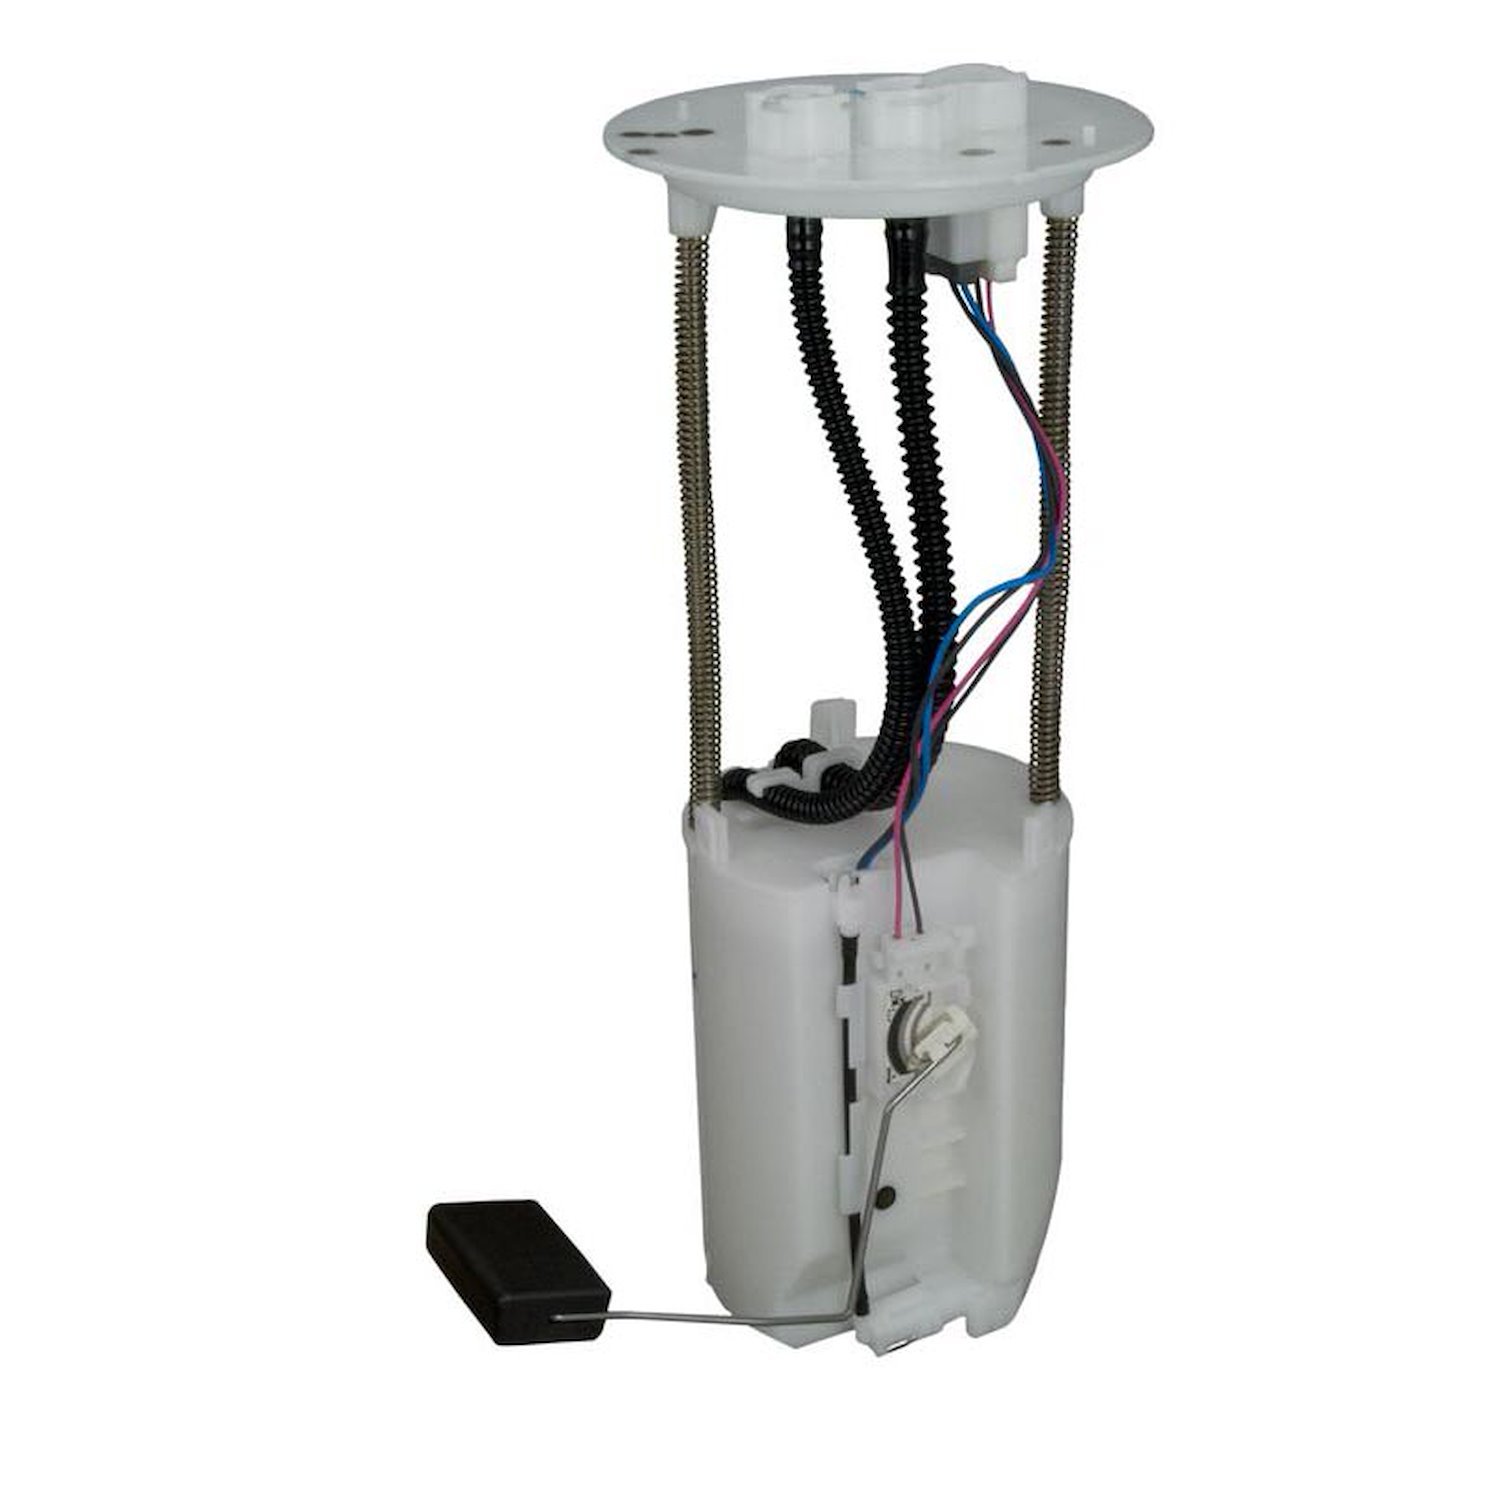 OE Replacement Fuel Pump Module Assembly for 2005-2006 Toyota Tundra/2005-2007 Toyota Sequoia